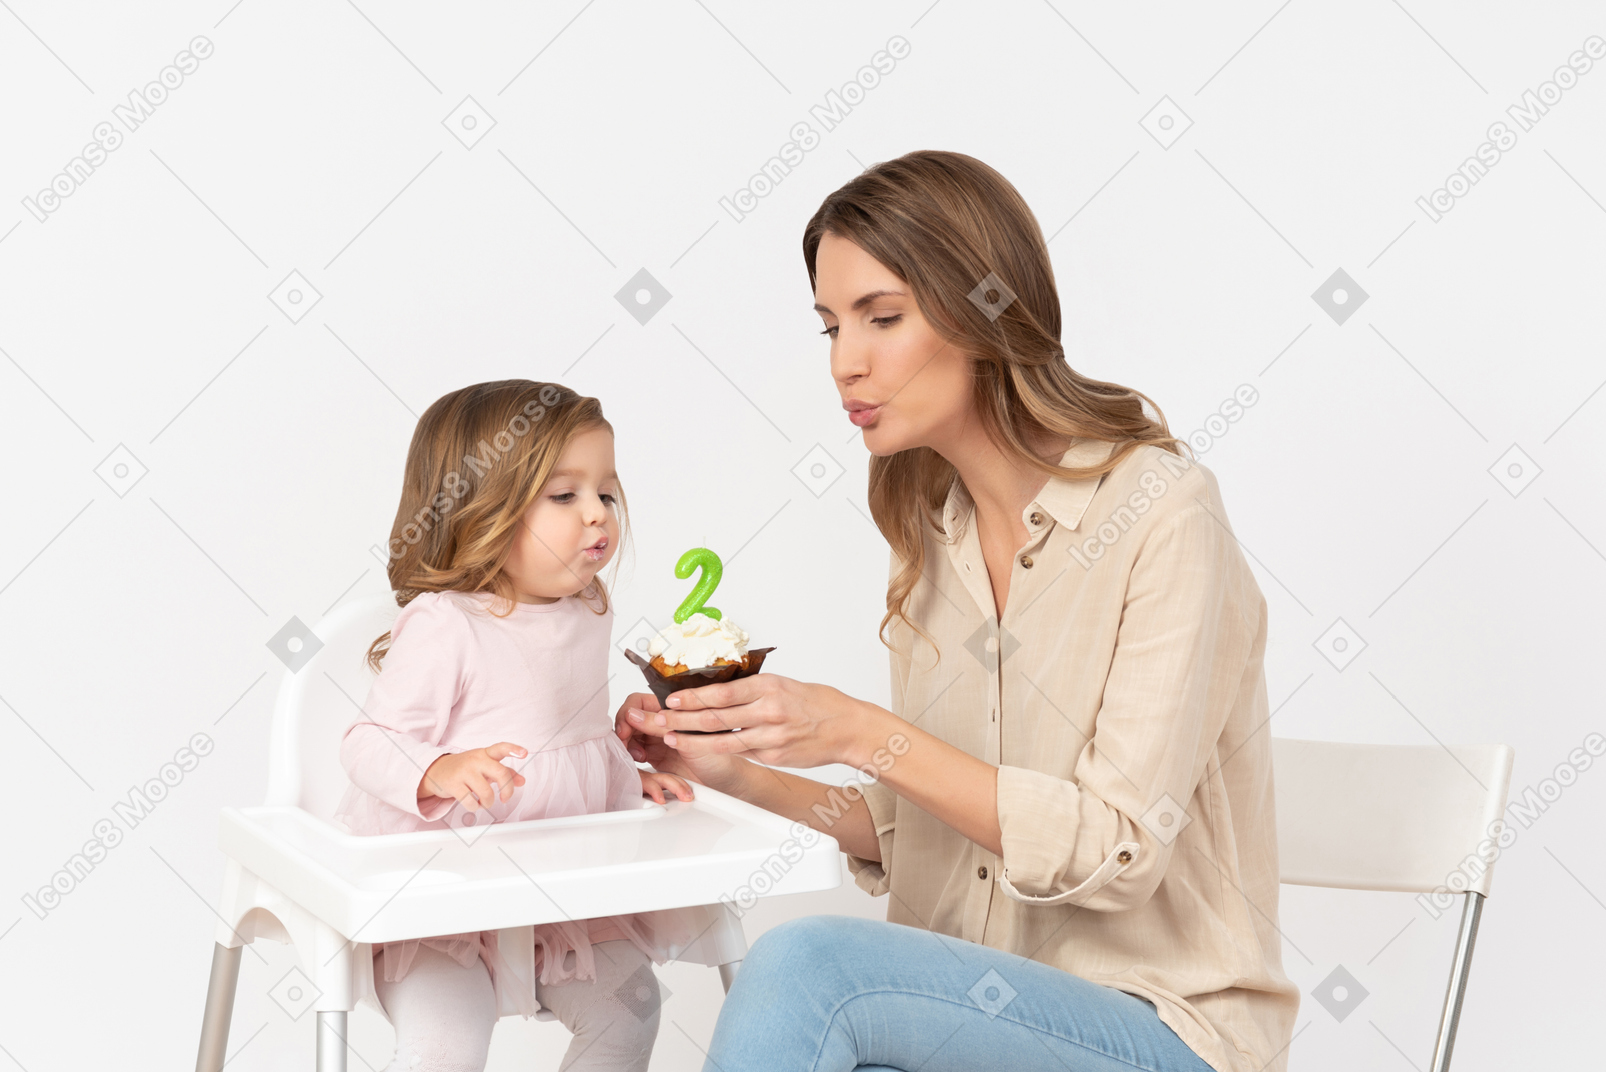 Baby girl blowing off a candle as her mother's holding a birthday cake